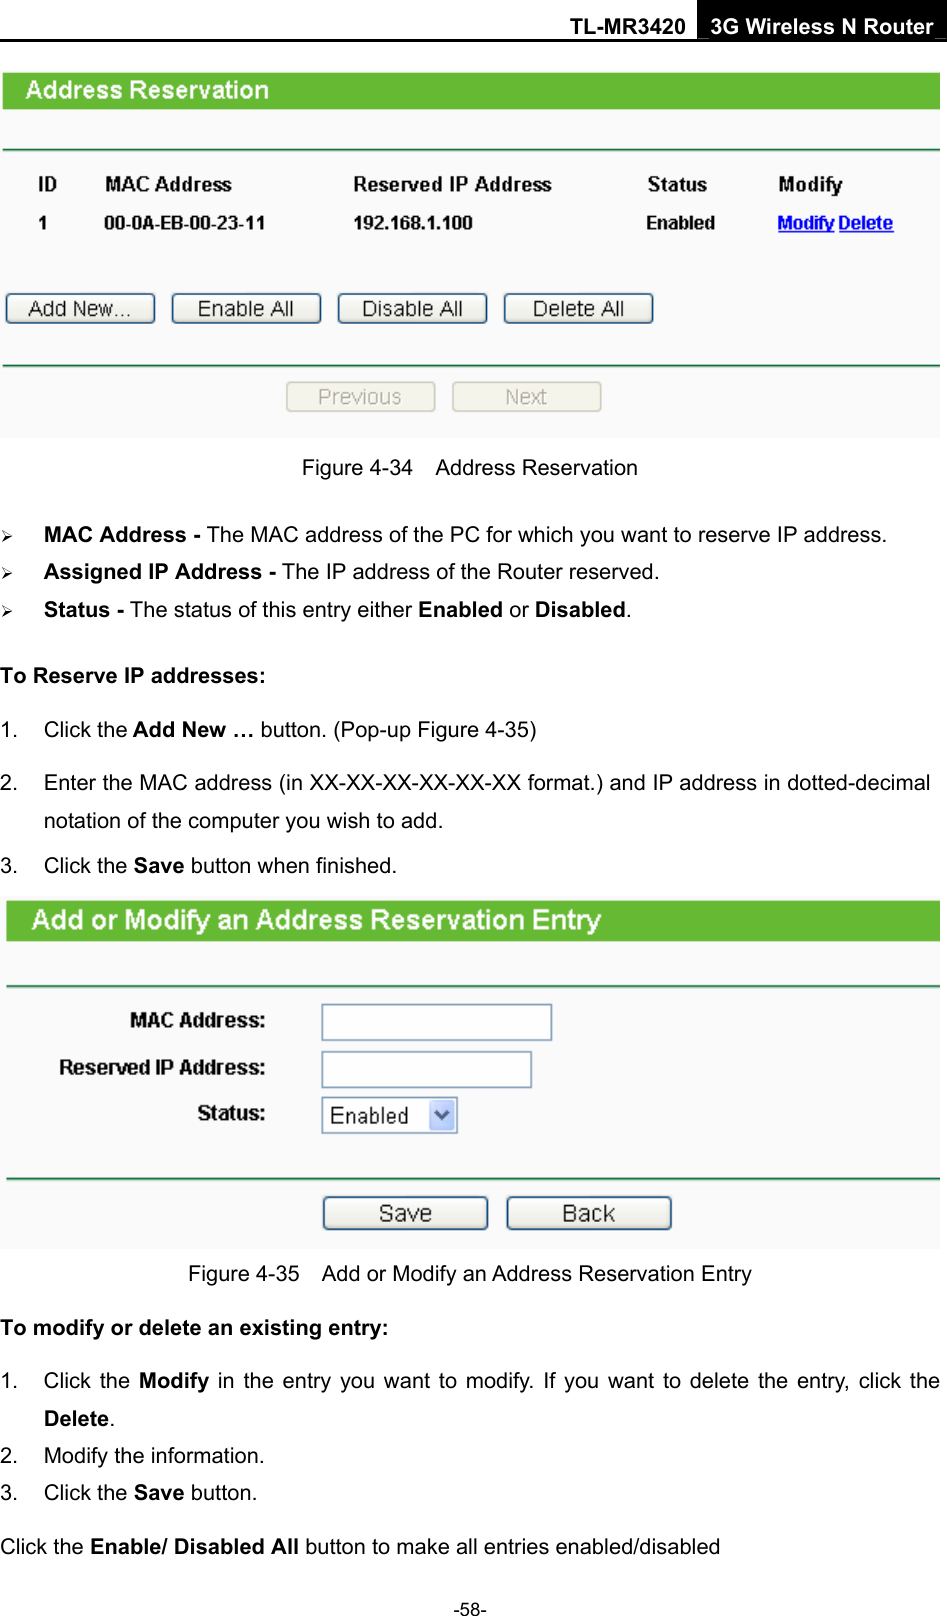 TL-MR3420 3G Wireless N Router -58-  Figure 4-34  Address Reservation ¾ MAC Address - The MAC address of the PC for which you want to reserve IP address. ¾ Assigned IP Address - The IP address of the Router reserved. ¾ Status - The status of this entry either Enabled or Disabled. To Reserve IP addresses:  1. Click the Add New … button. (Pop-up Figure 4-35) 2.  Enter the MAC address (in XX-XX-XX-XX-XX-XX format.) and IP address in dotted-decimal notation of the computer you wish to add.   3. Click the Save button when finished.    Figure 4-35    Add or Modify an Address Reservation Entry To modify or delete an existing entry: 1. Click the Modify in the entry you want to modify. If you want to delete the entry, click the Delete. 2.  Modify the information.   3. Click the Save button. Click the Enable/ Disabled All button to make all entries enabled/disabled 